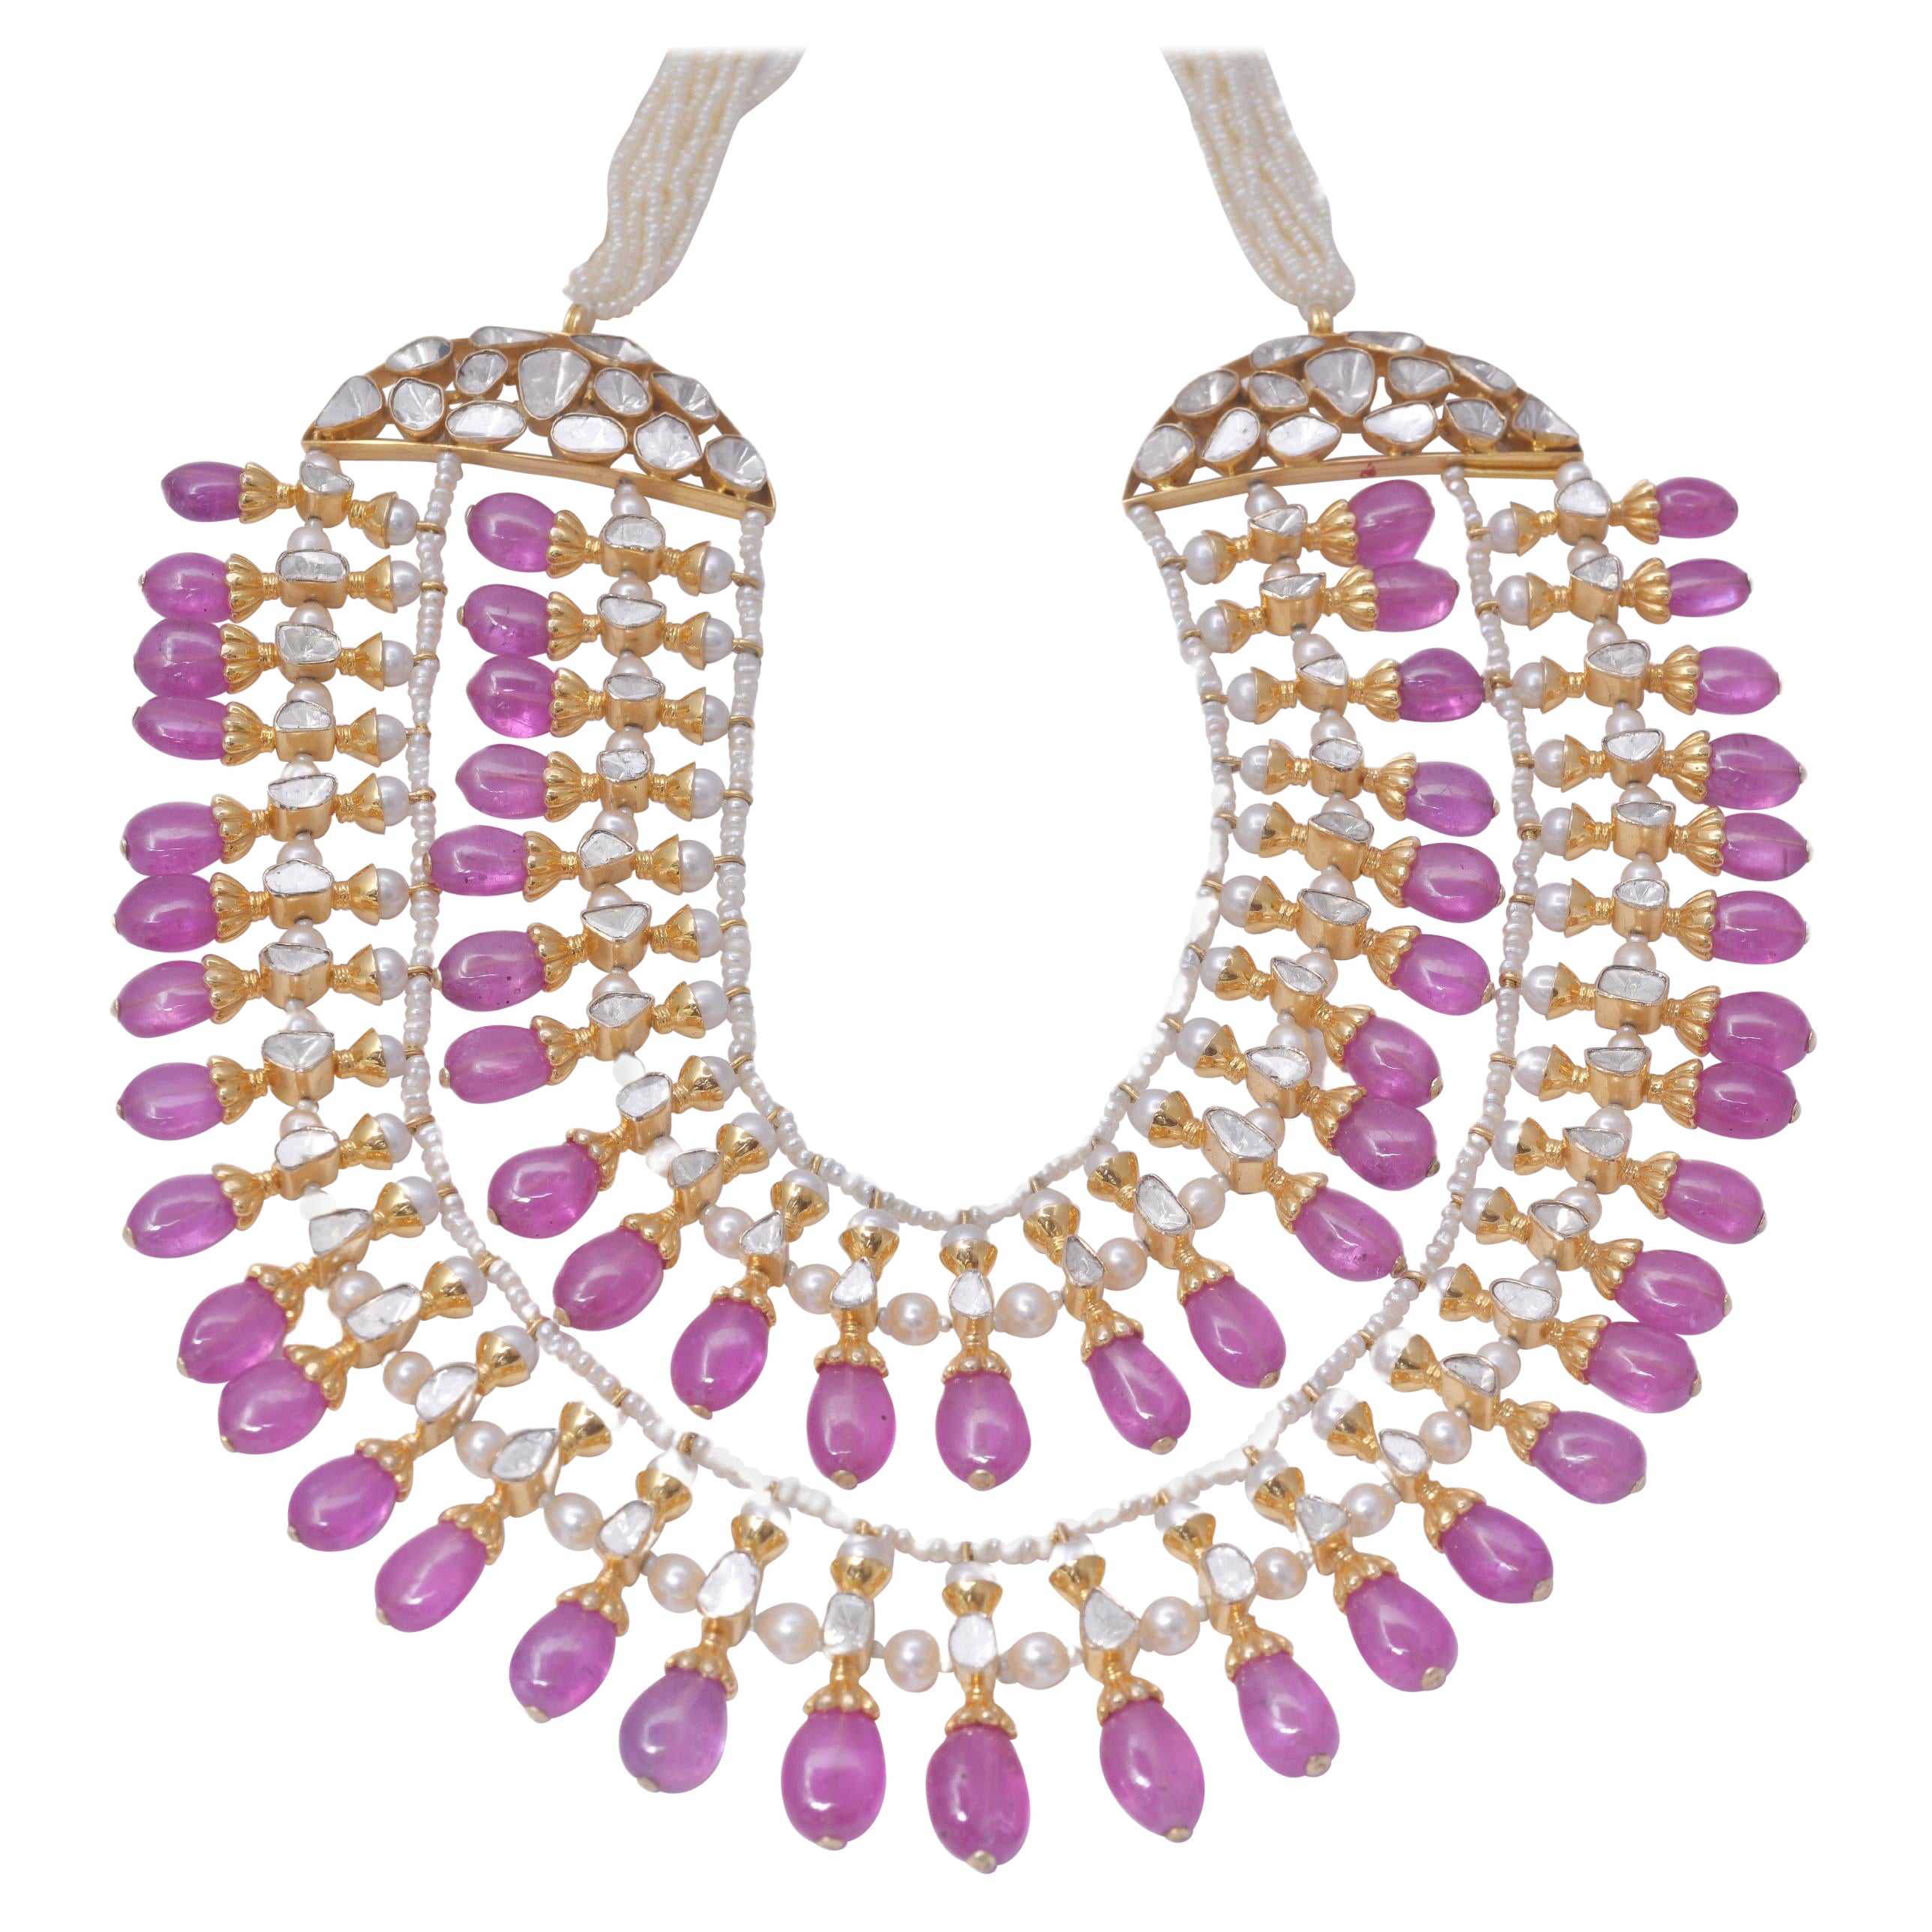 18k gold 11.05cts Polki Diamond &pink sapphire & pearl Necklace